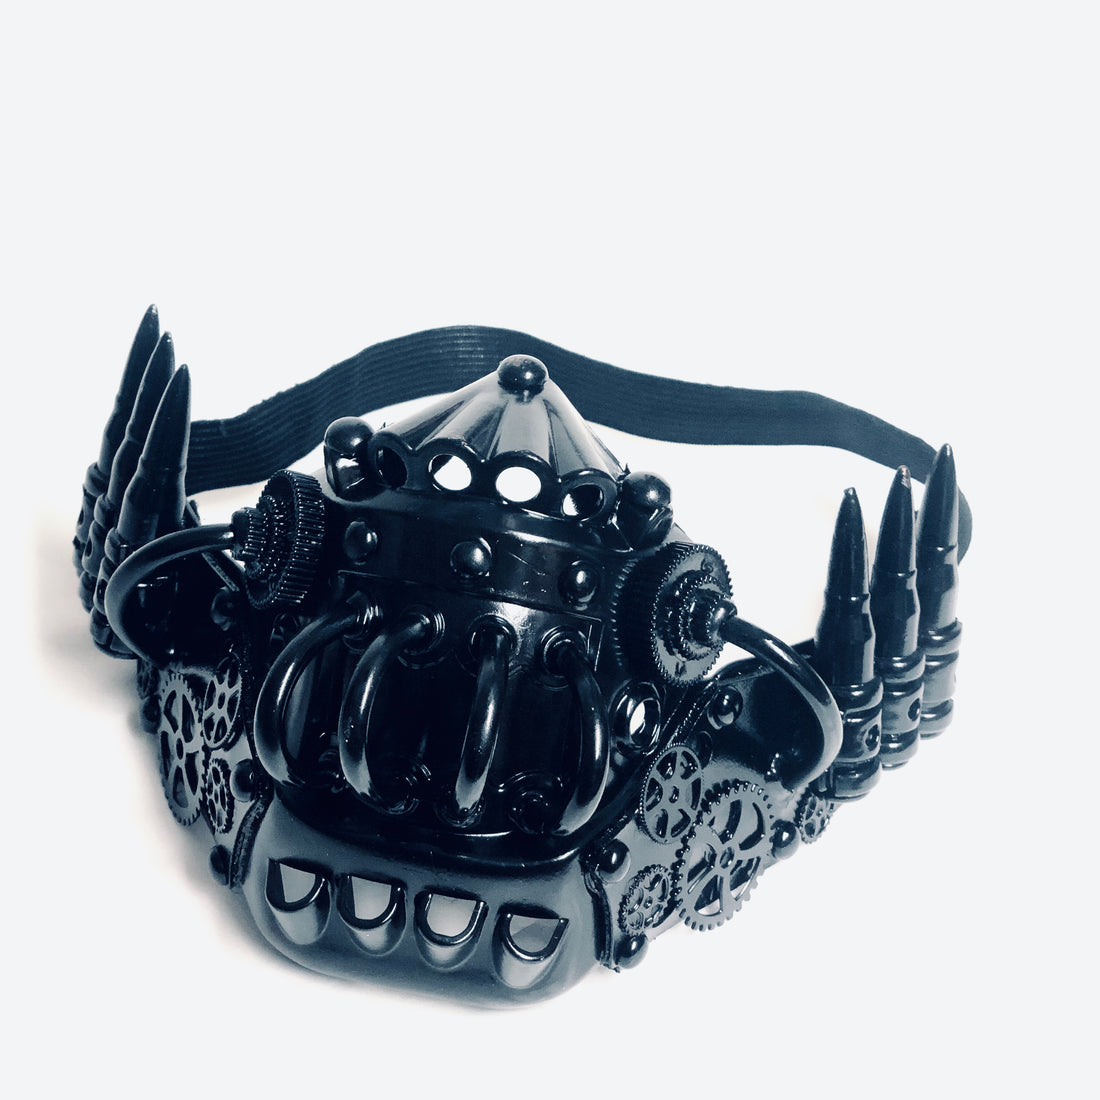 Respirator mouth guard in black for sale.